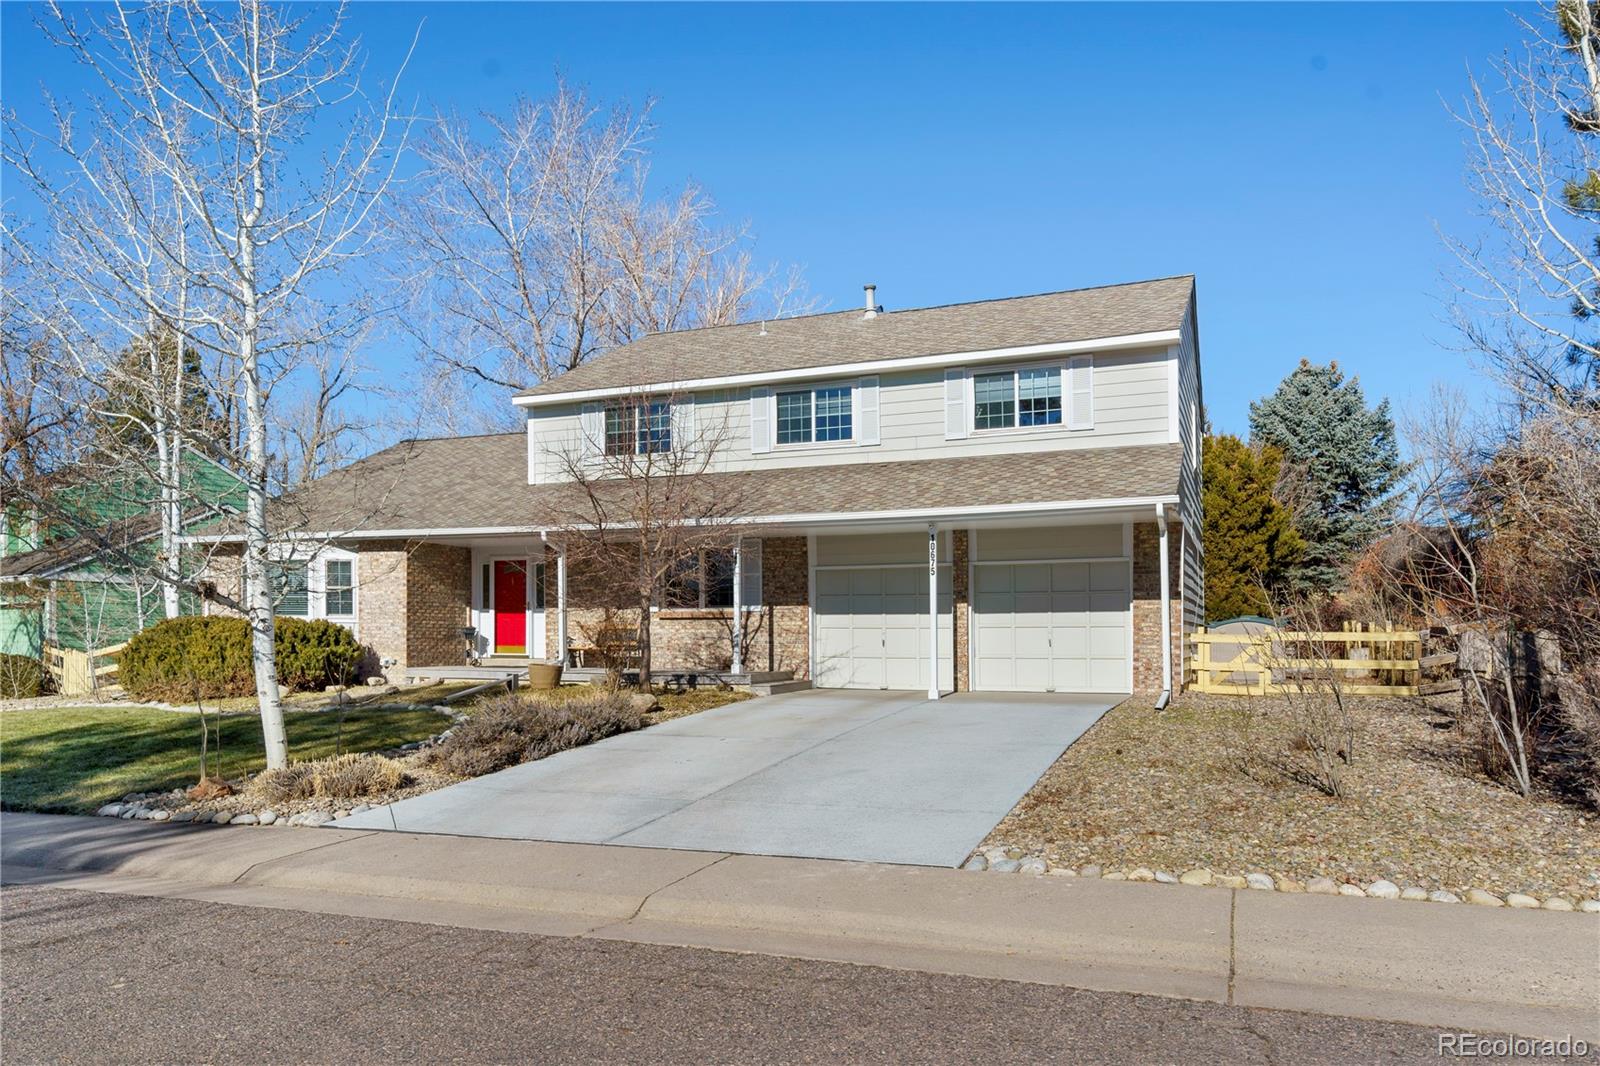 10675 w devils head , Littleton sold home. Closed on 2024-03-13 for $840,000.